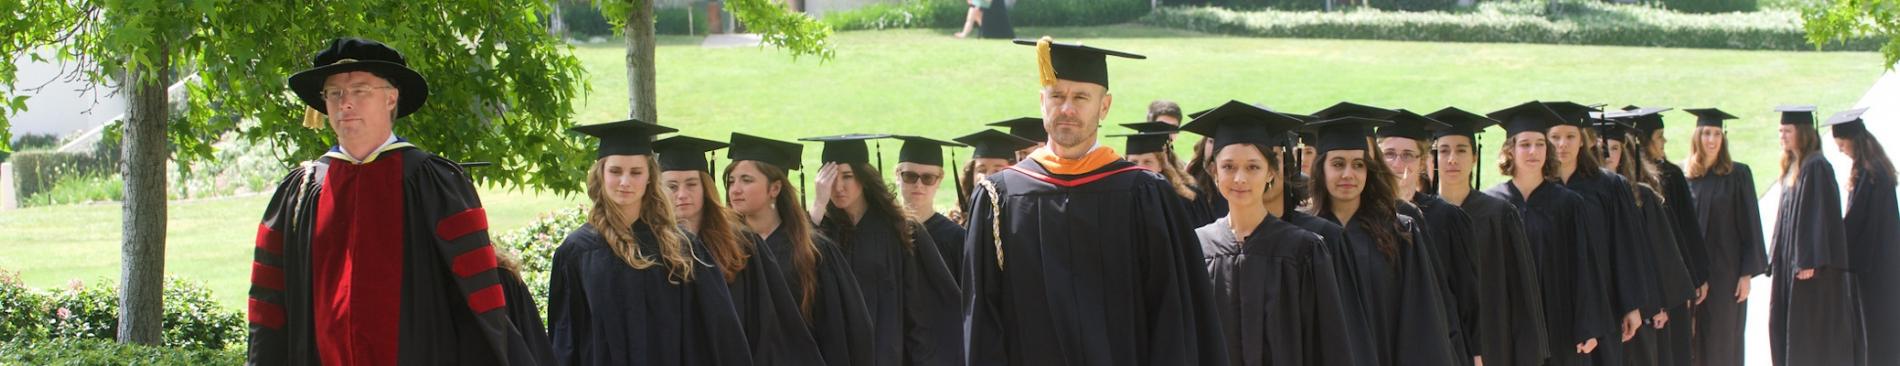 Faculty Commencement procession